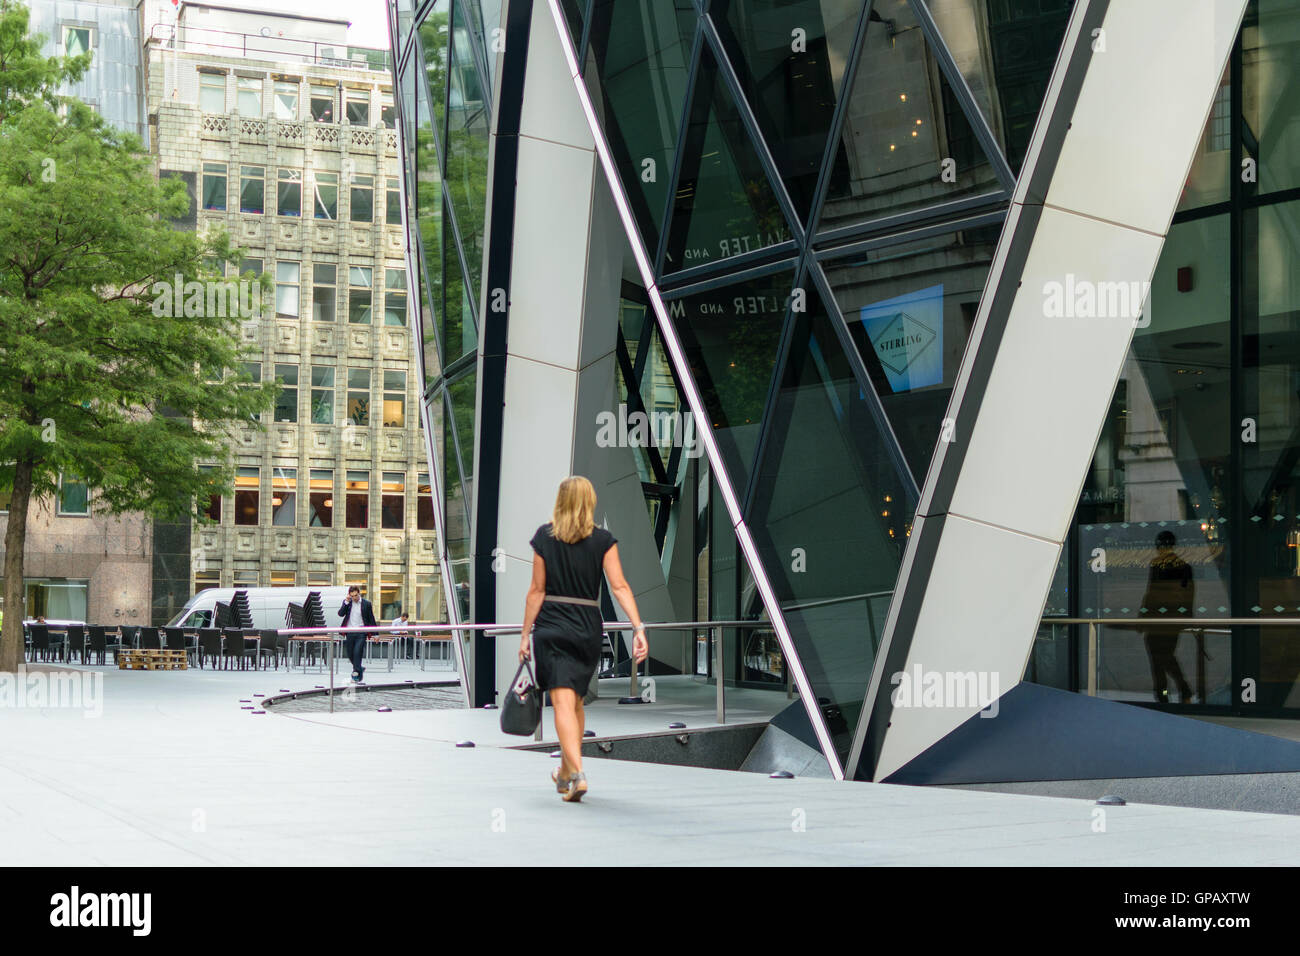 London, England - 31 August 2016:An unidentified business woman walks pass the Gherkin building in City of London Stock Photo